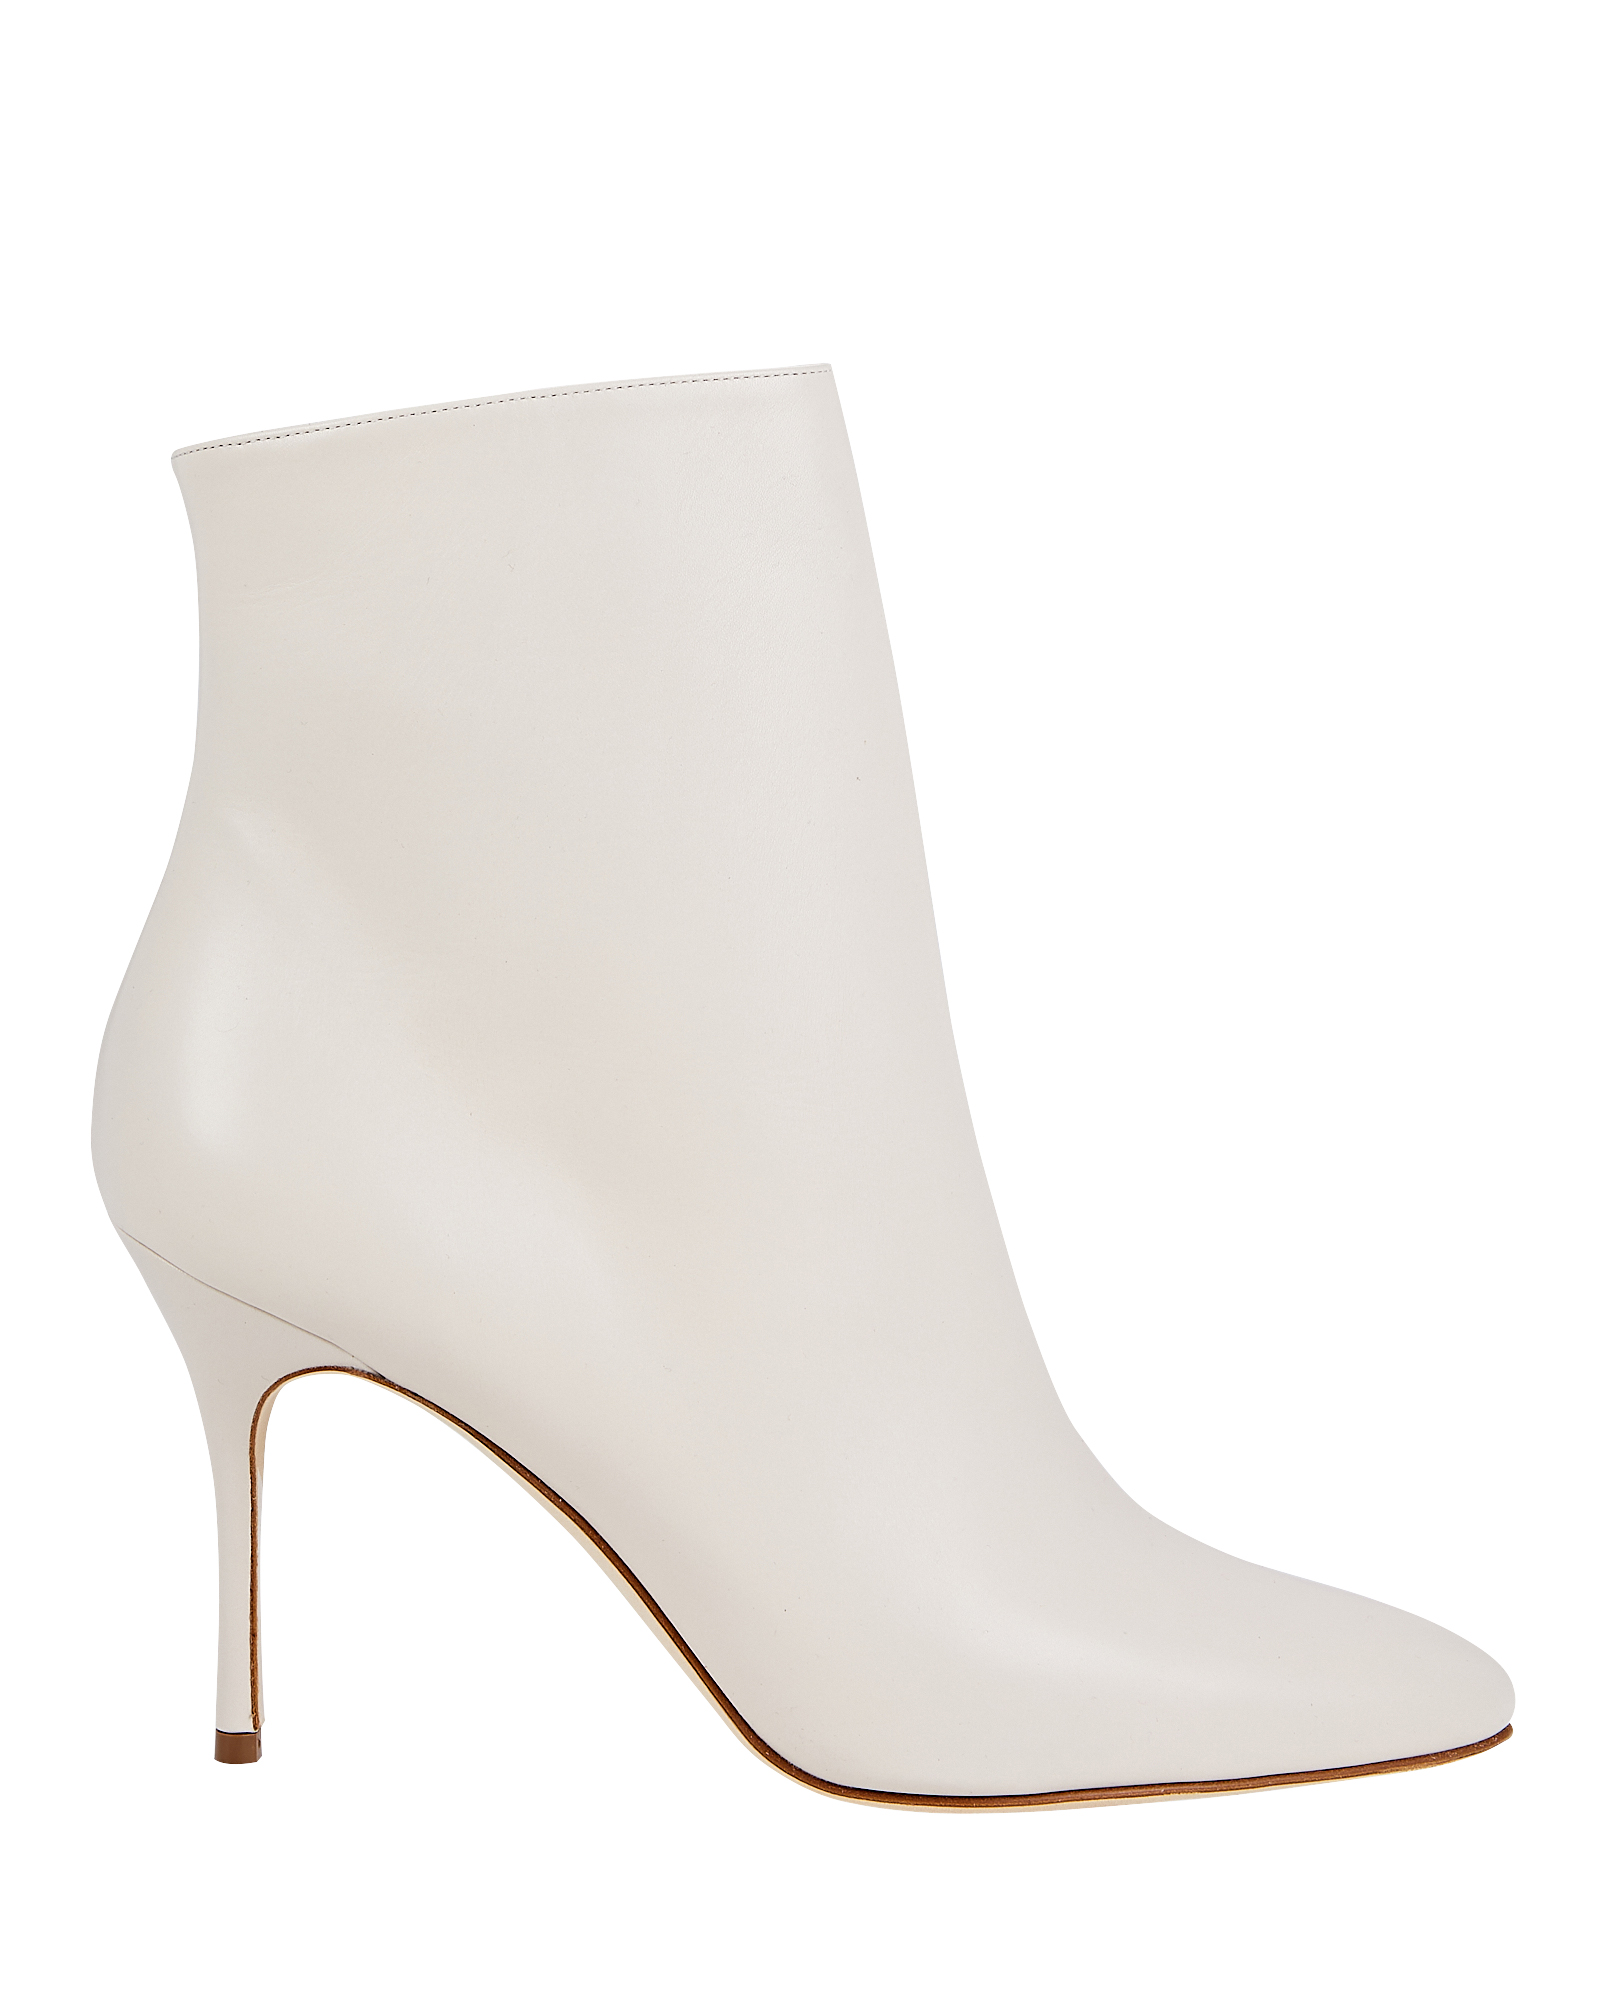 Manolo Blahnik Insopo 90 Leather Ankle Boots In White | INTERMIX®